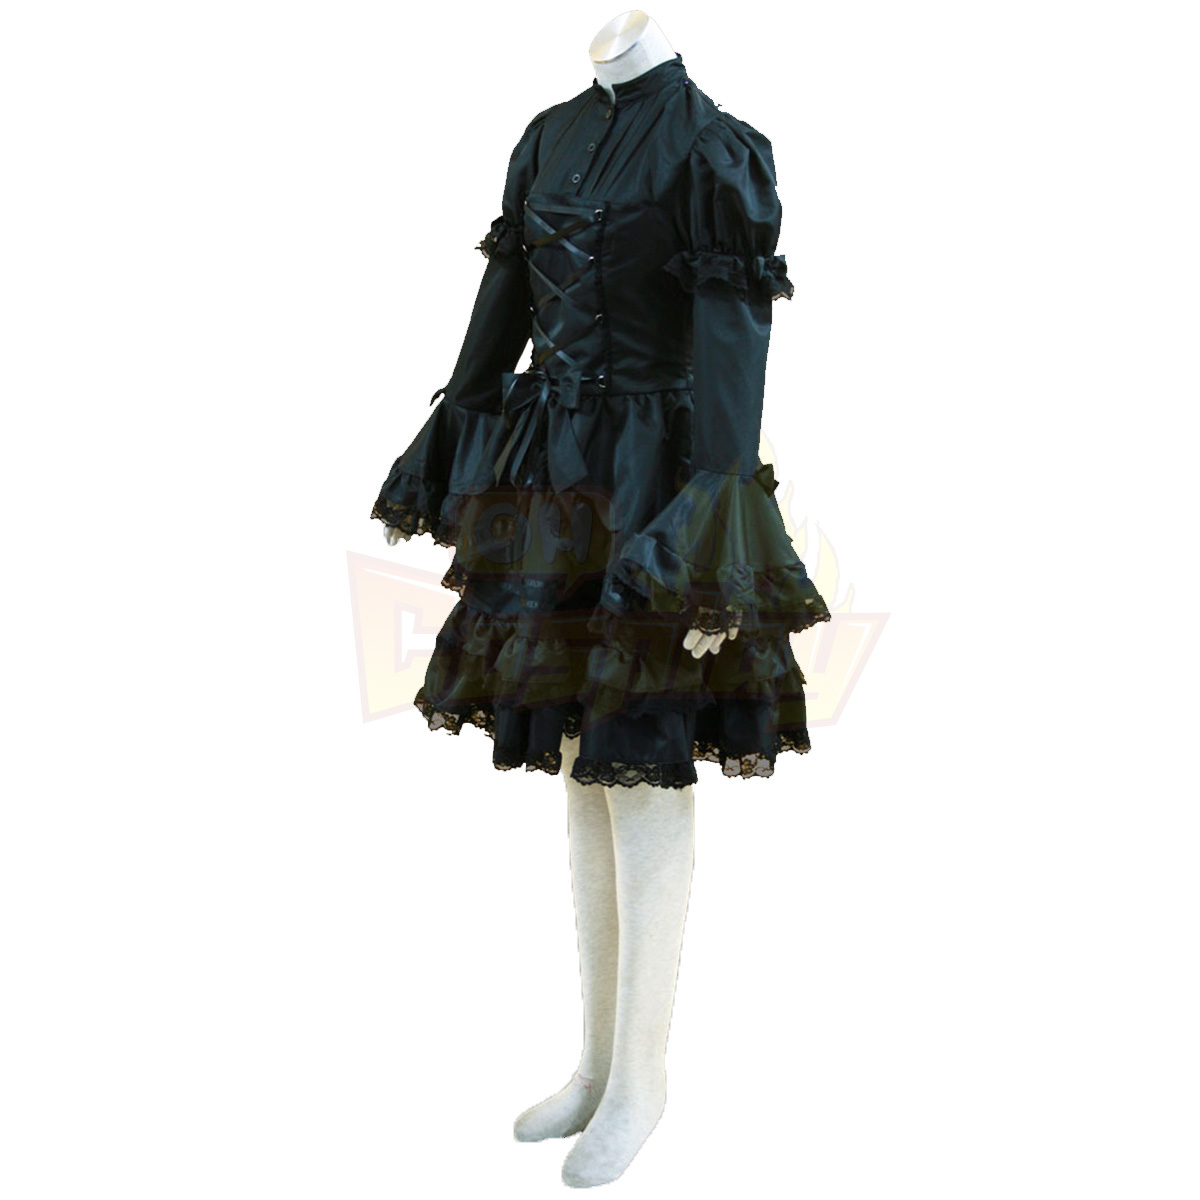 Deluxe Lolita Culture Black and White Sleeveless Short Dresses Cosplay